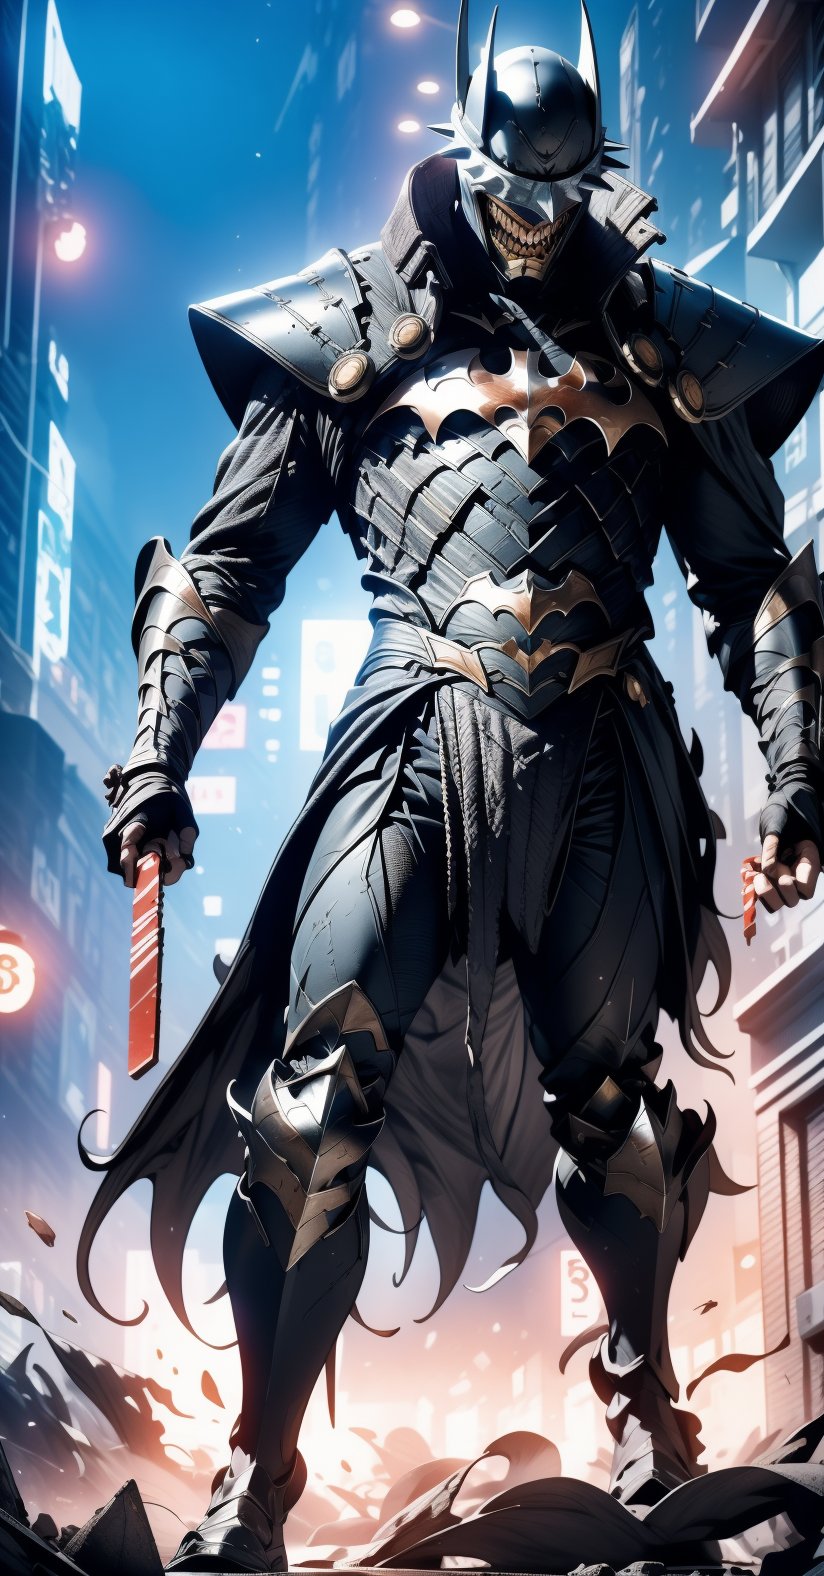 Batman who laughs, ((full-body_portrait)), Ruined City, dust, night, standing_up, upper_body knight armor, black armor, lower body knight armor,nijistyle